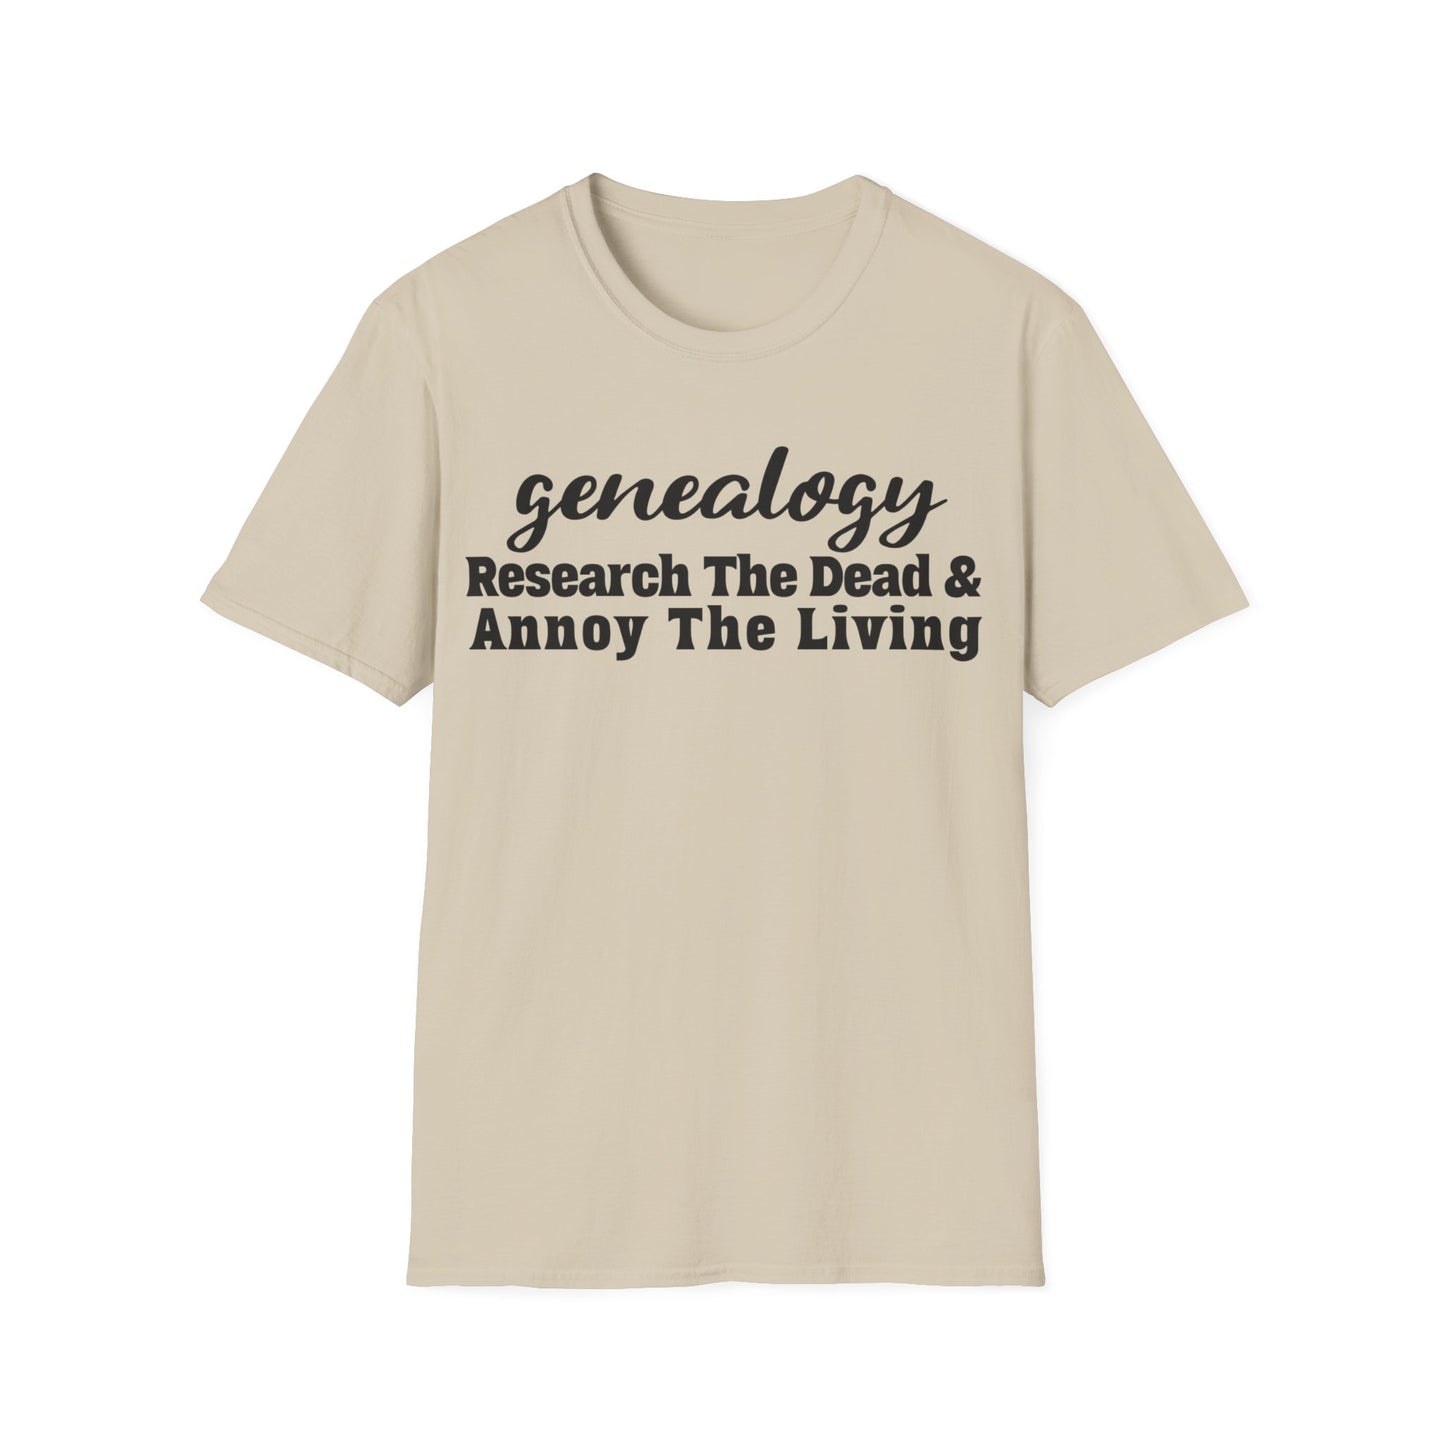 Genealogy - Research the Dead & Annoy the Living